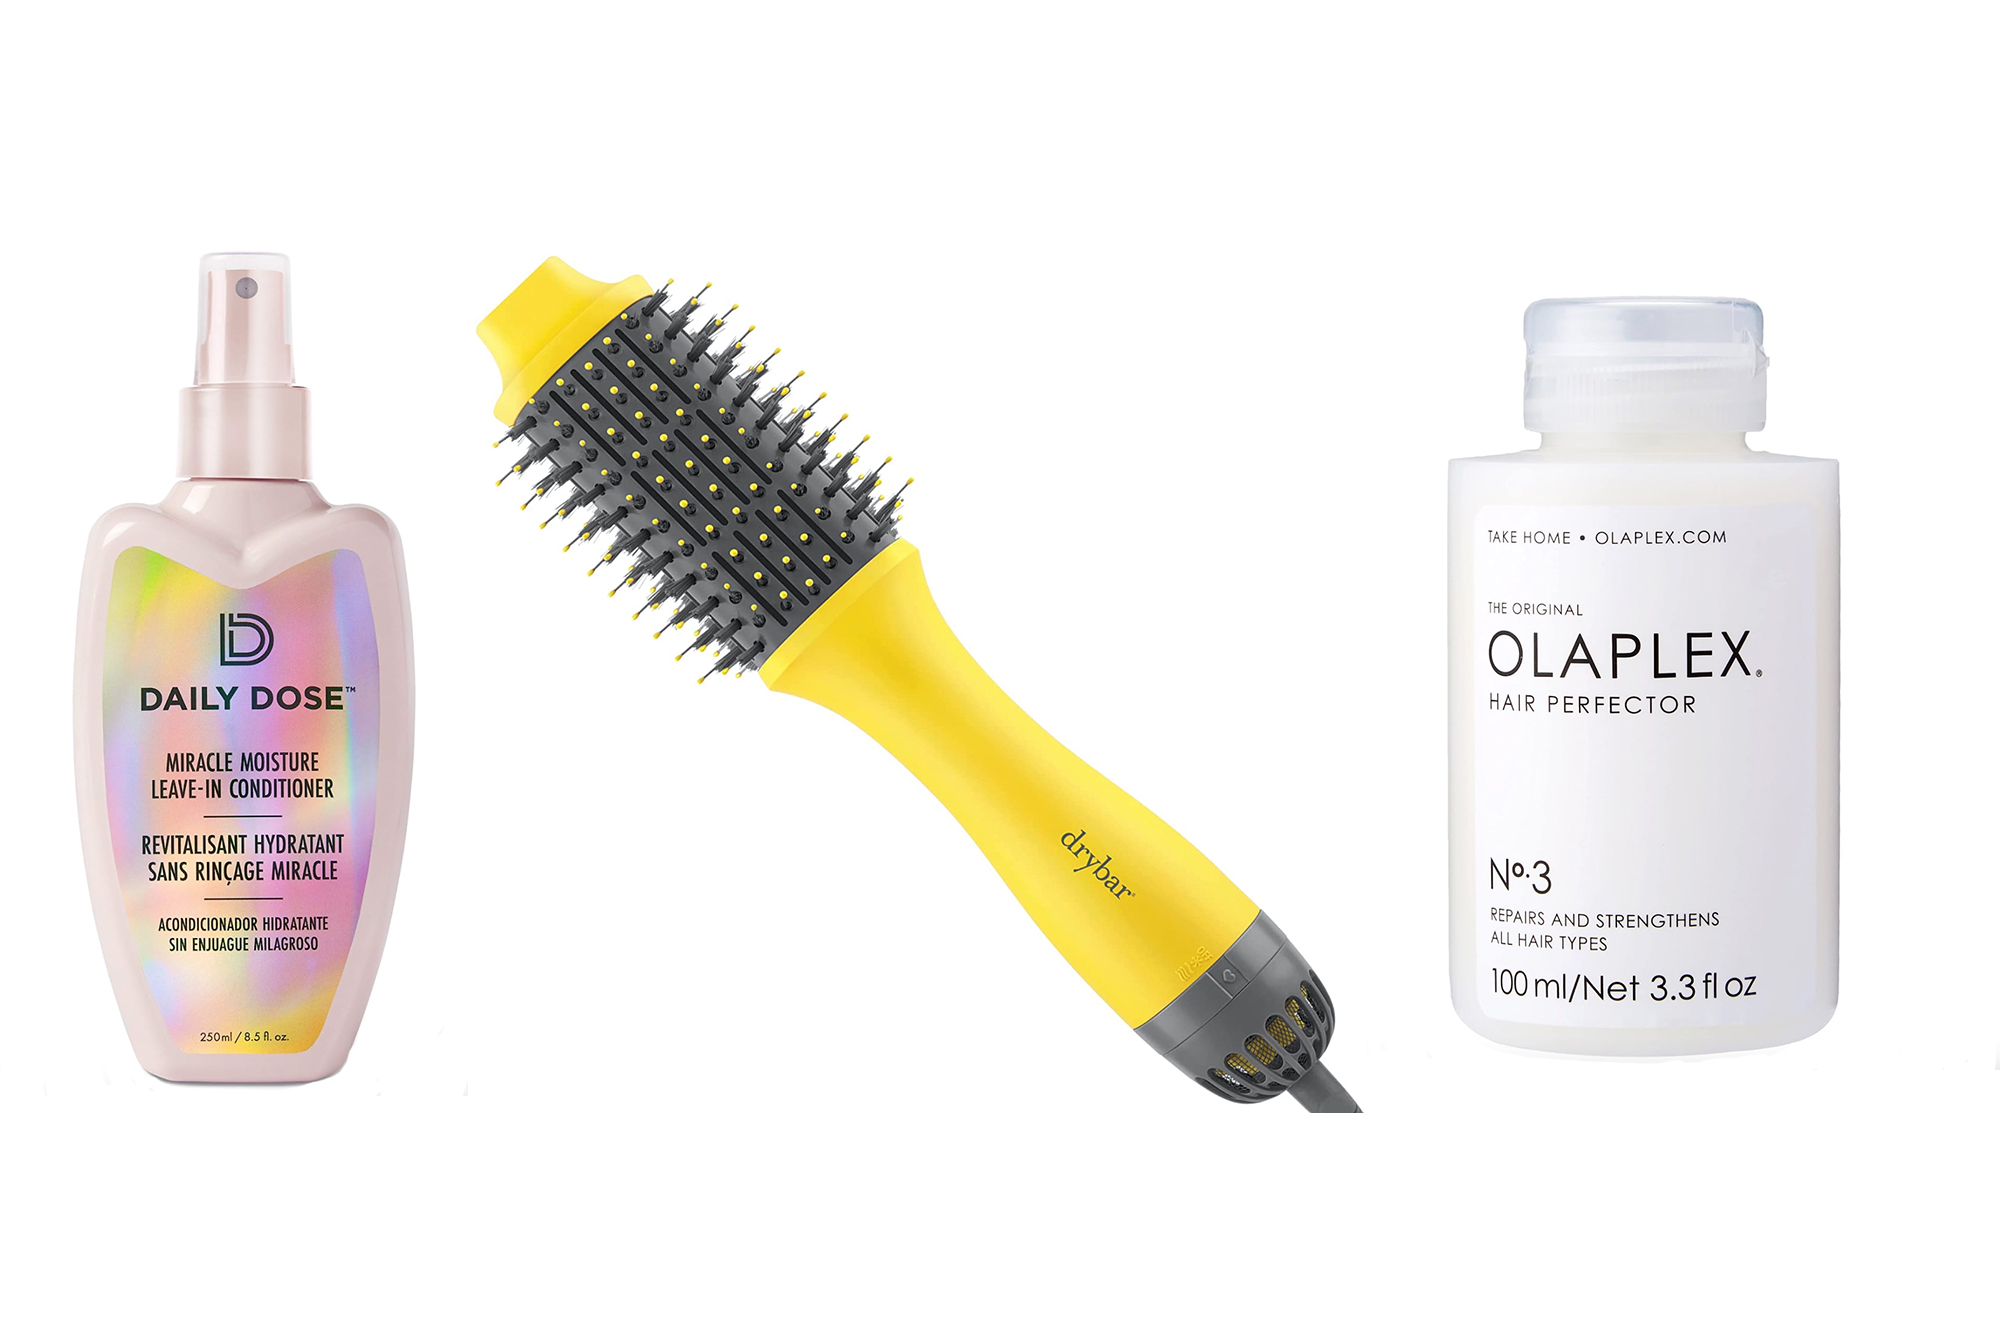 11 Best Prime Day Luxury Hair Deals on Styling Tools and Products